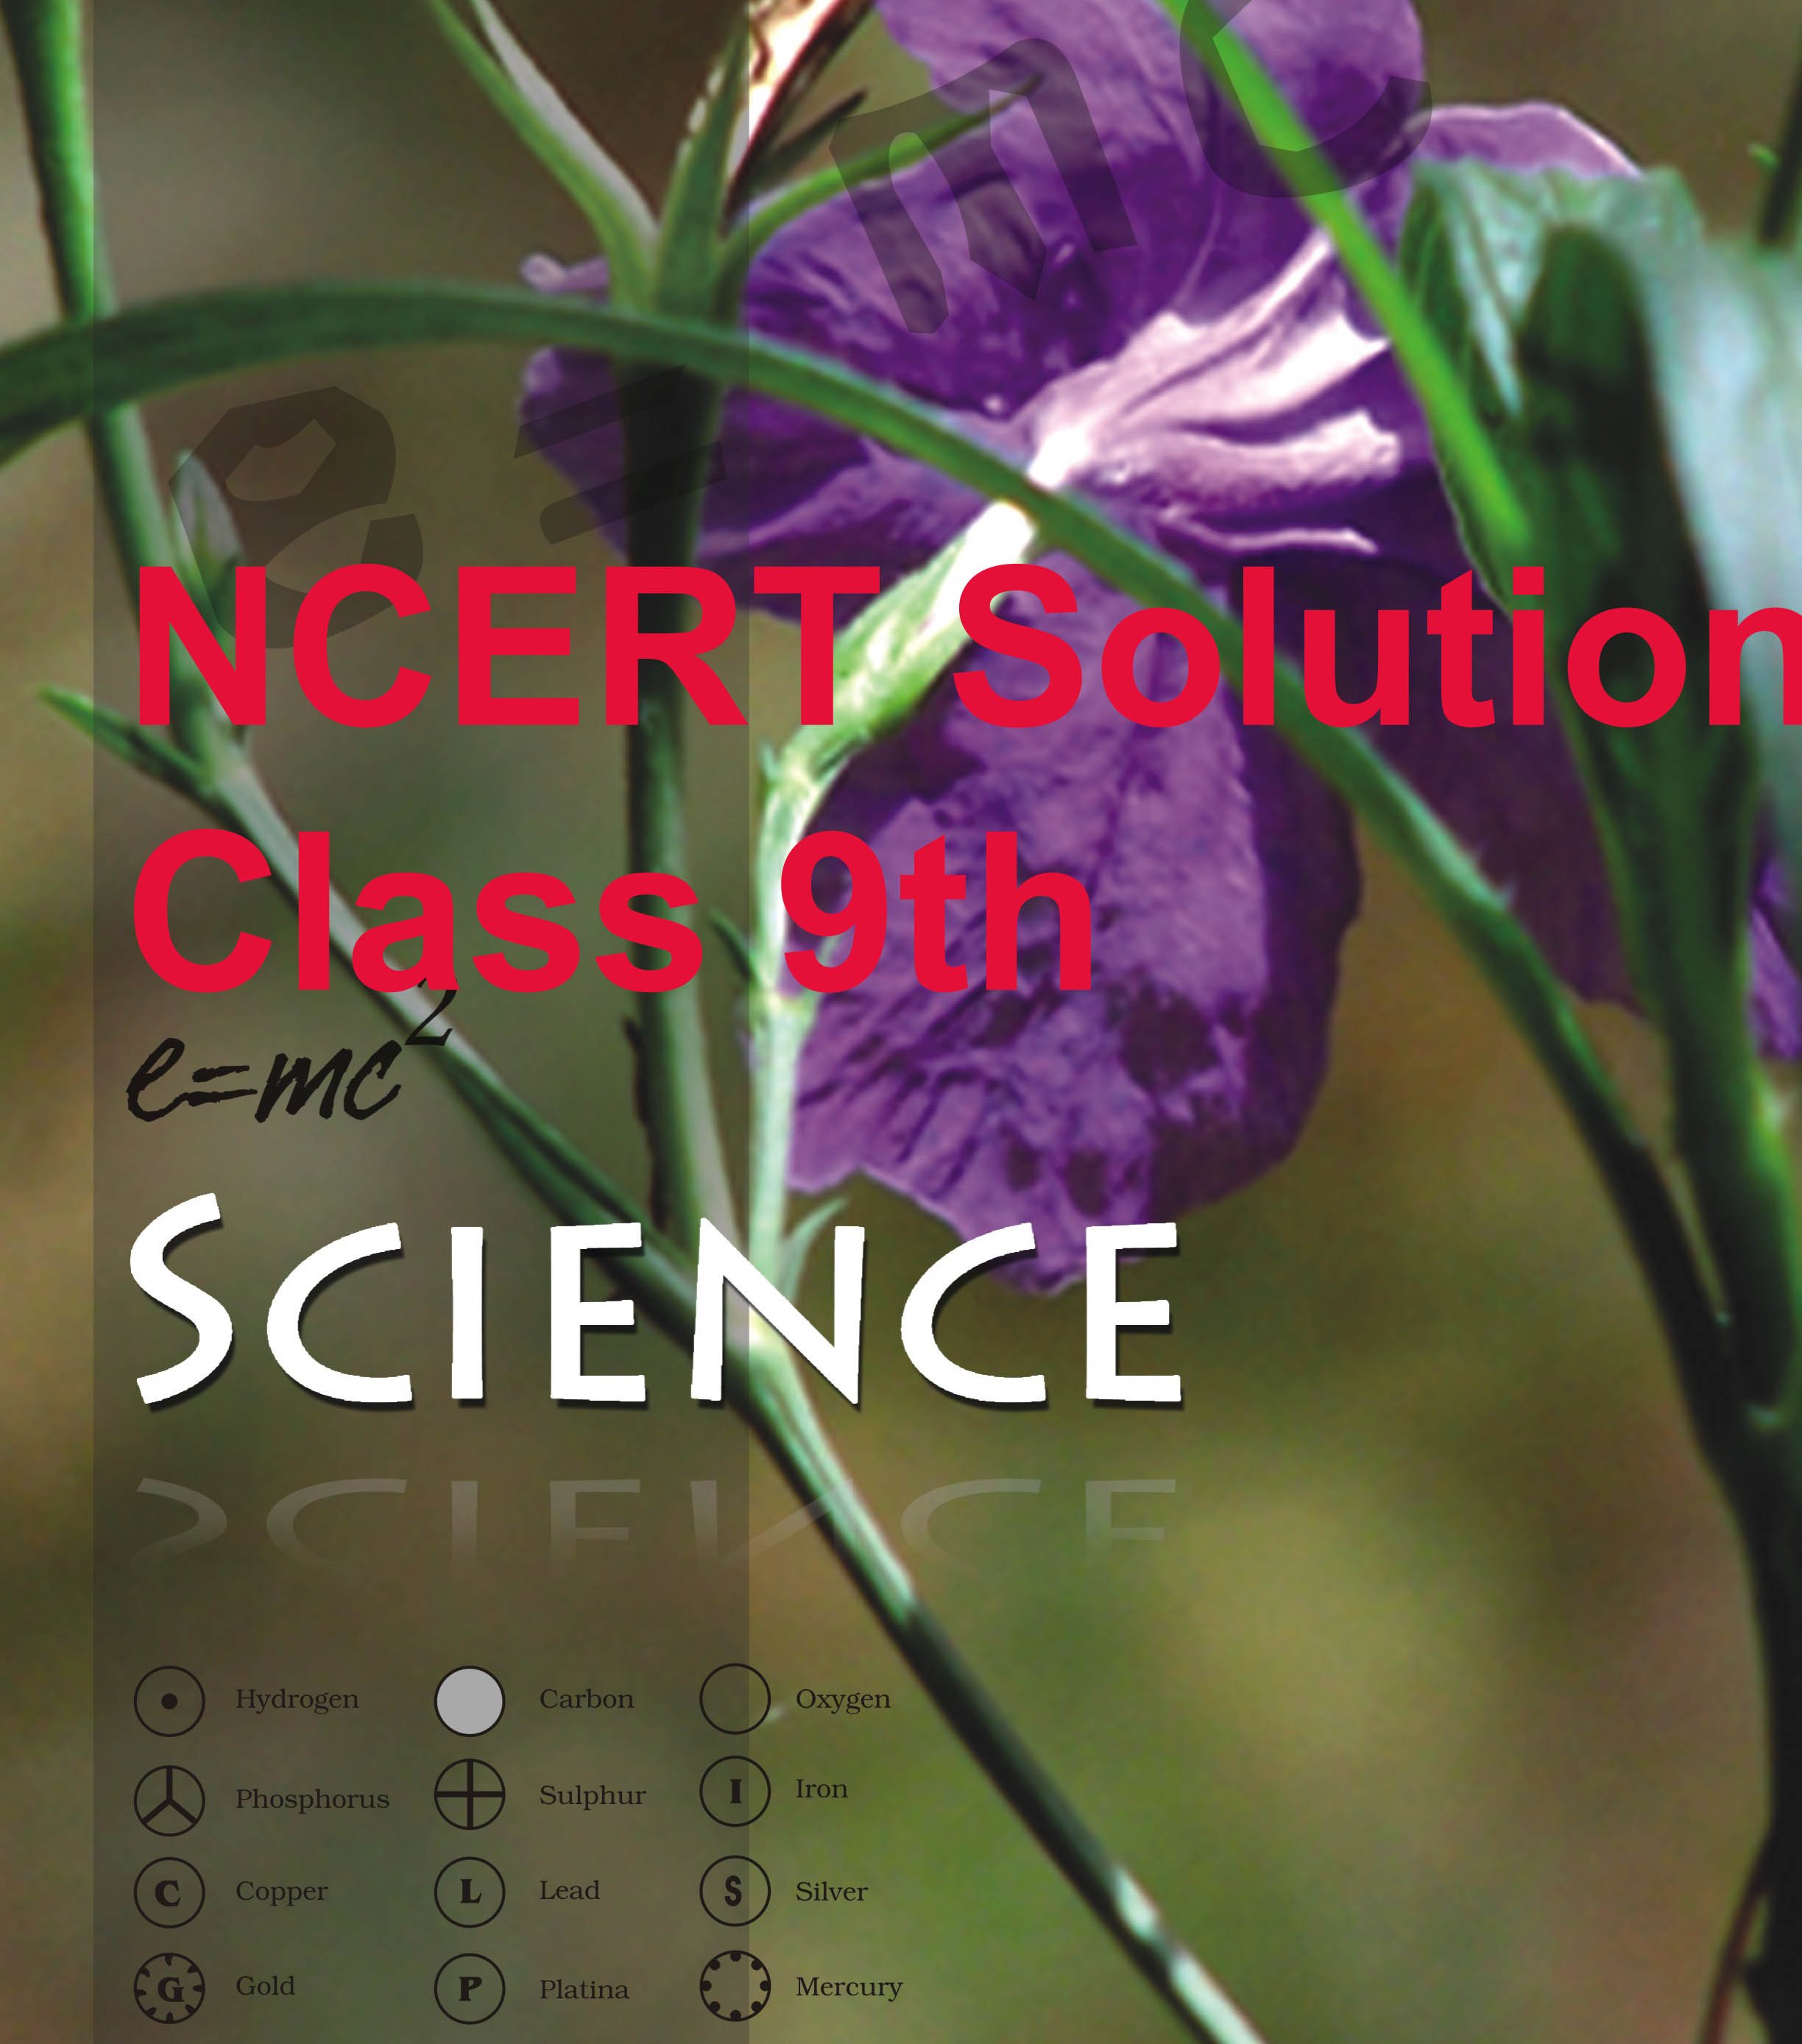 NCERT Solution Class 9th Science Ch 4